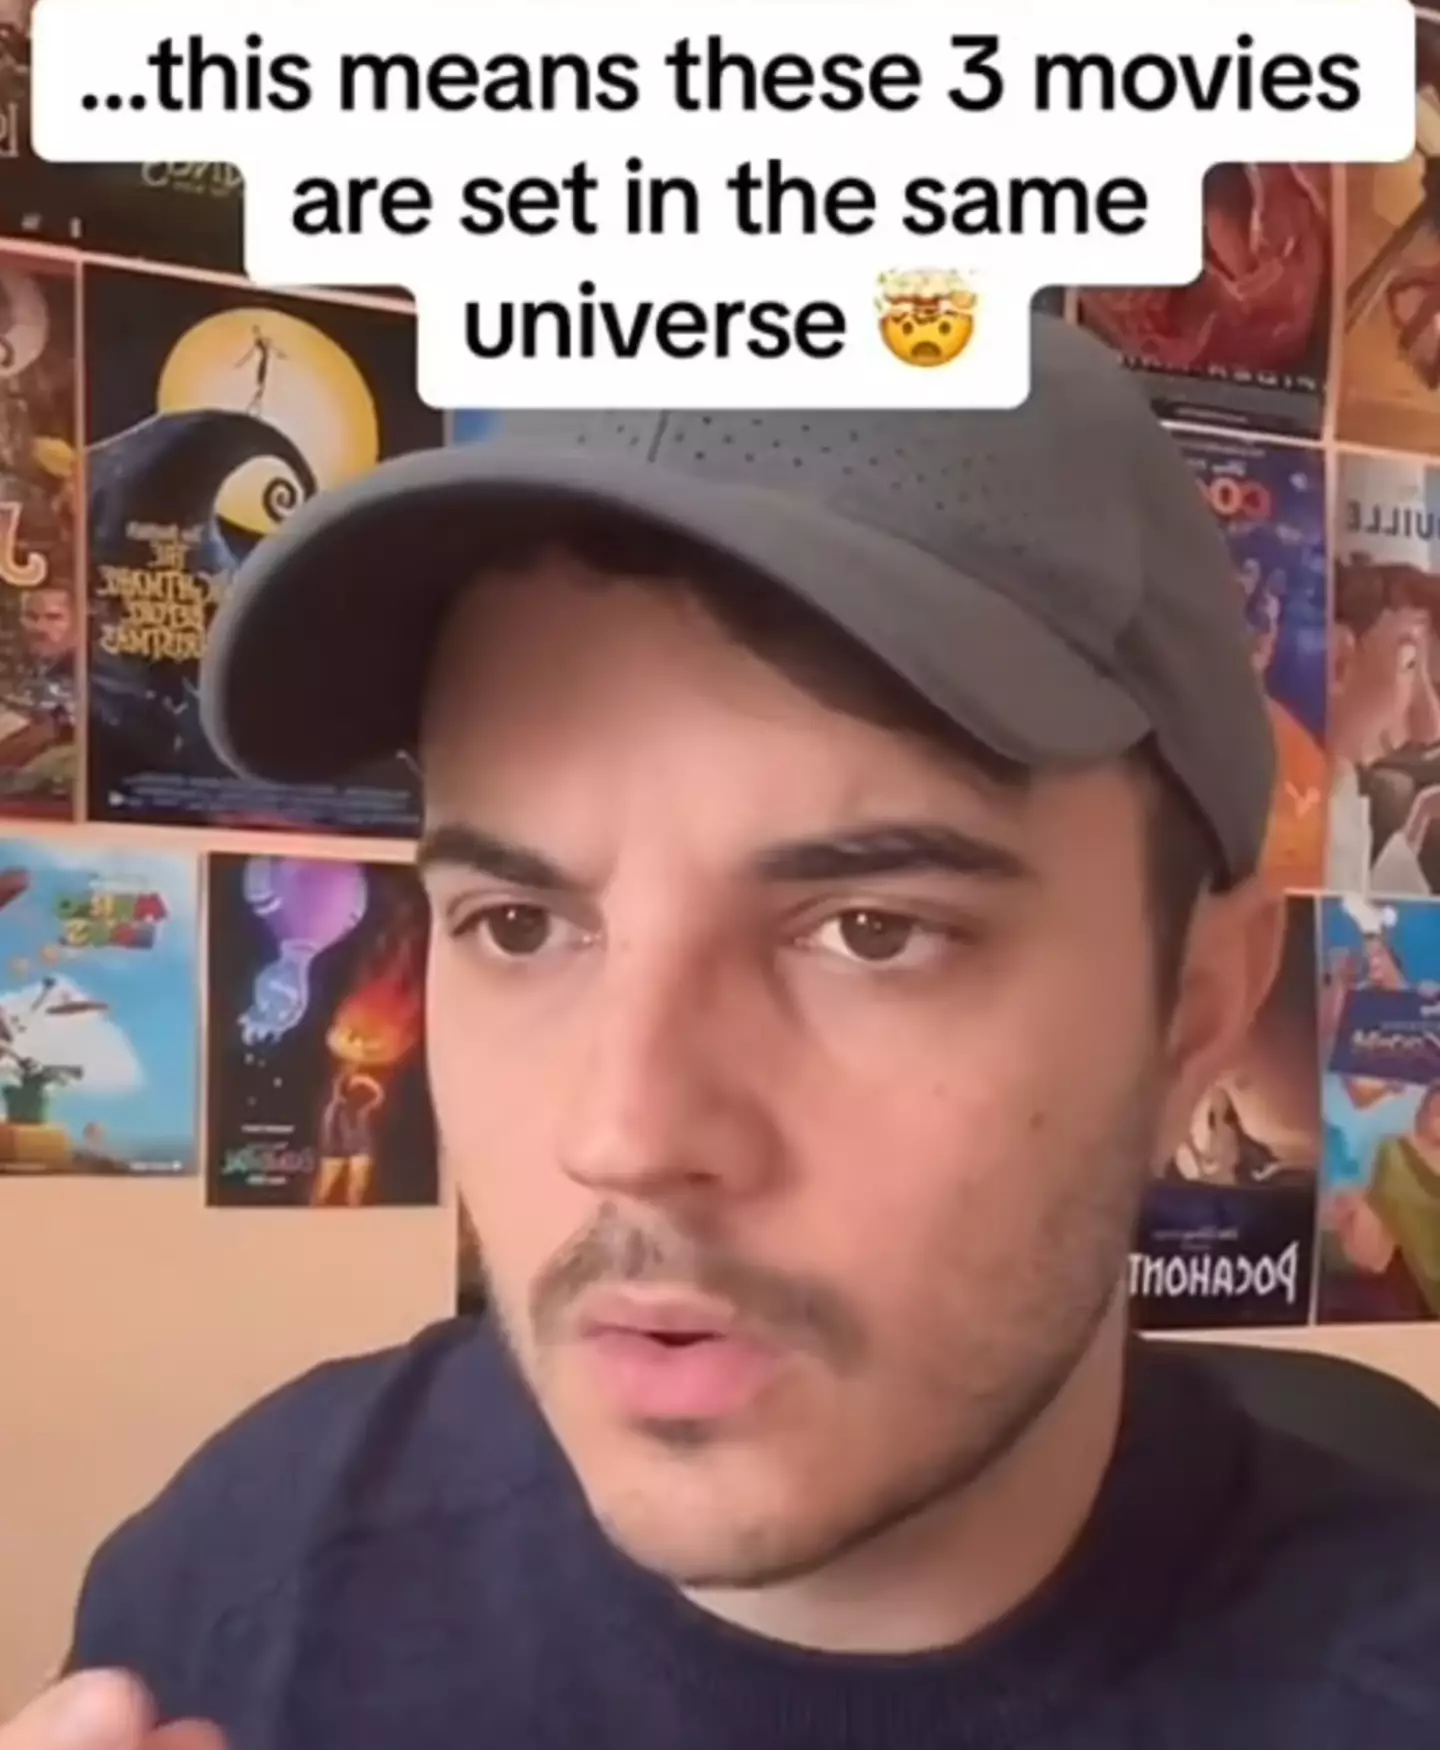 Ivan Mars believes he's connected the dots between the two movies.